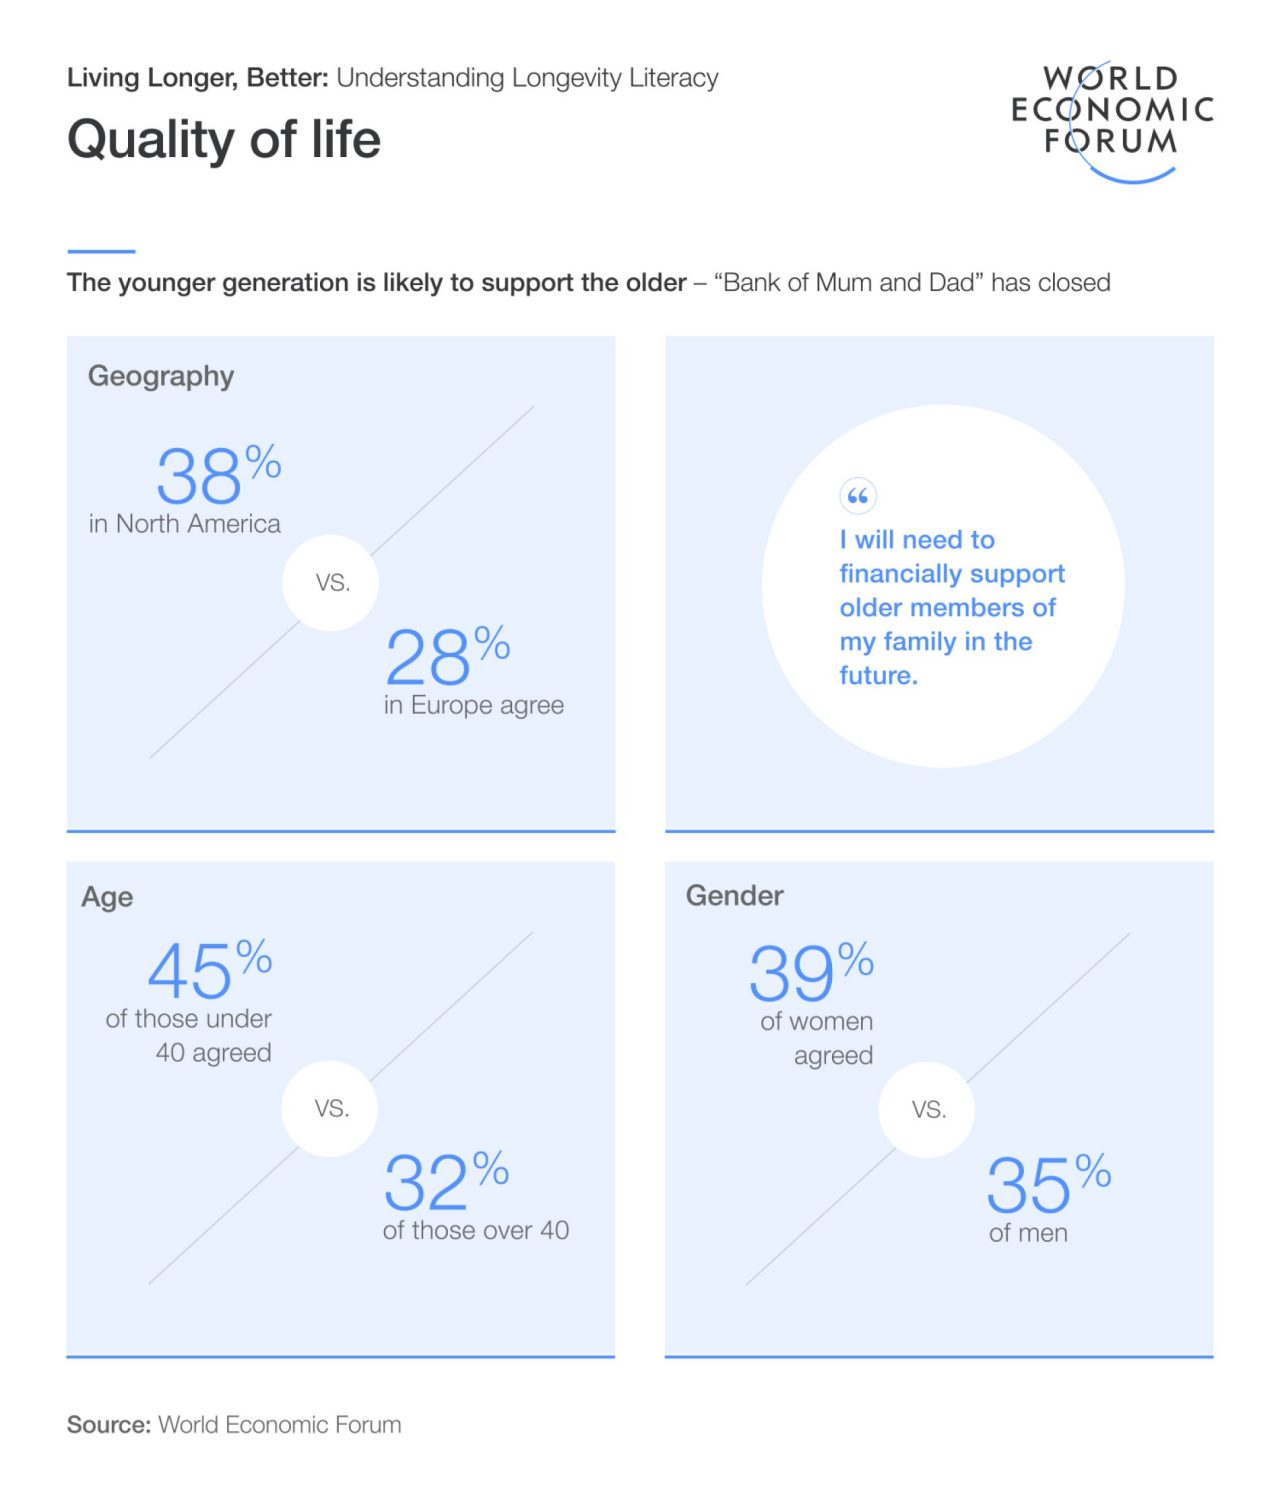 This graphic shows statistics from Mercer and the World Economic Forum’s report, Living Longer Better: Understanding Longevity Literacy, in response to statement “I will need to financially support older members of my family in the future.” By geography, 28% in Europe agree versus 38% in North America. By age, 45% of those under 40 agreed versus 32% of those over 40. By gender, 39% of women agreed versus 35% of men.